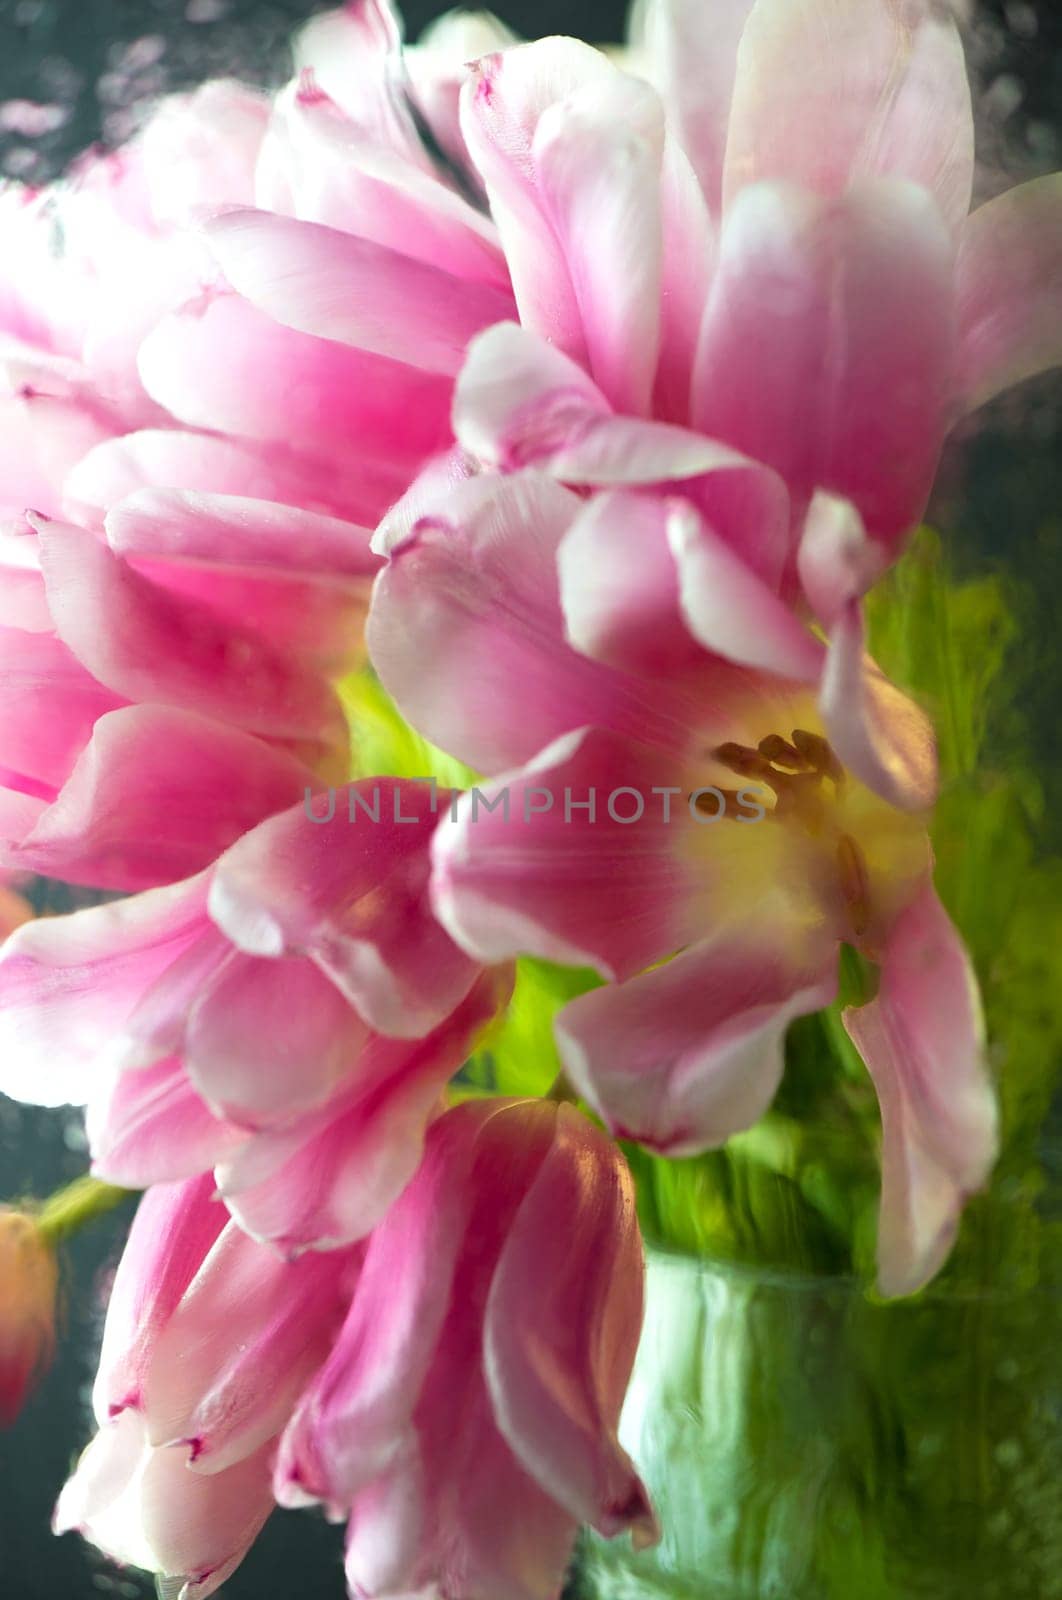 Rain outside pink tulips behind the glass window in the house